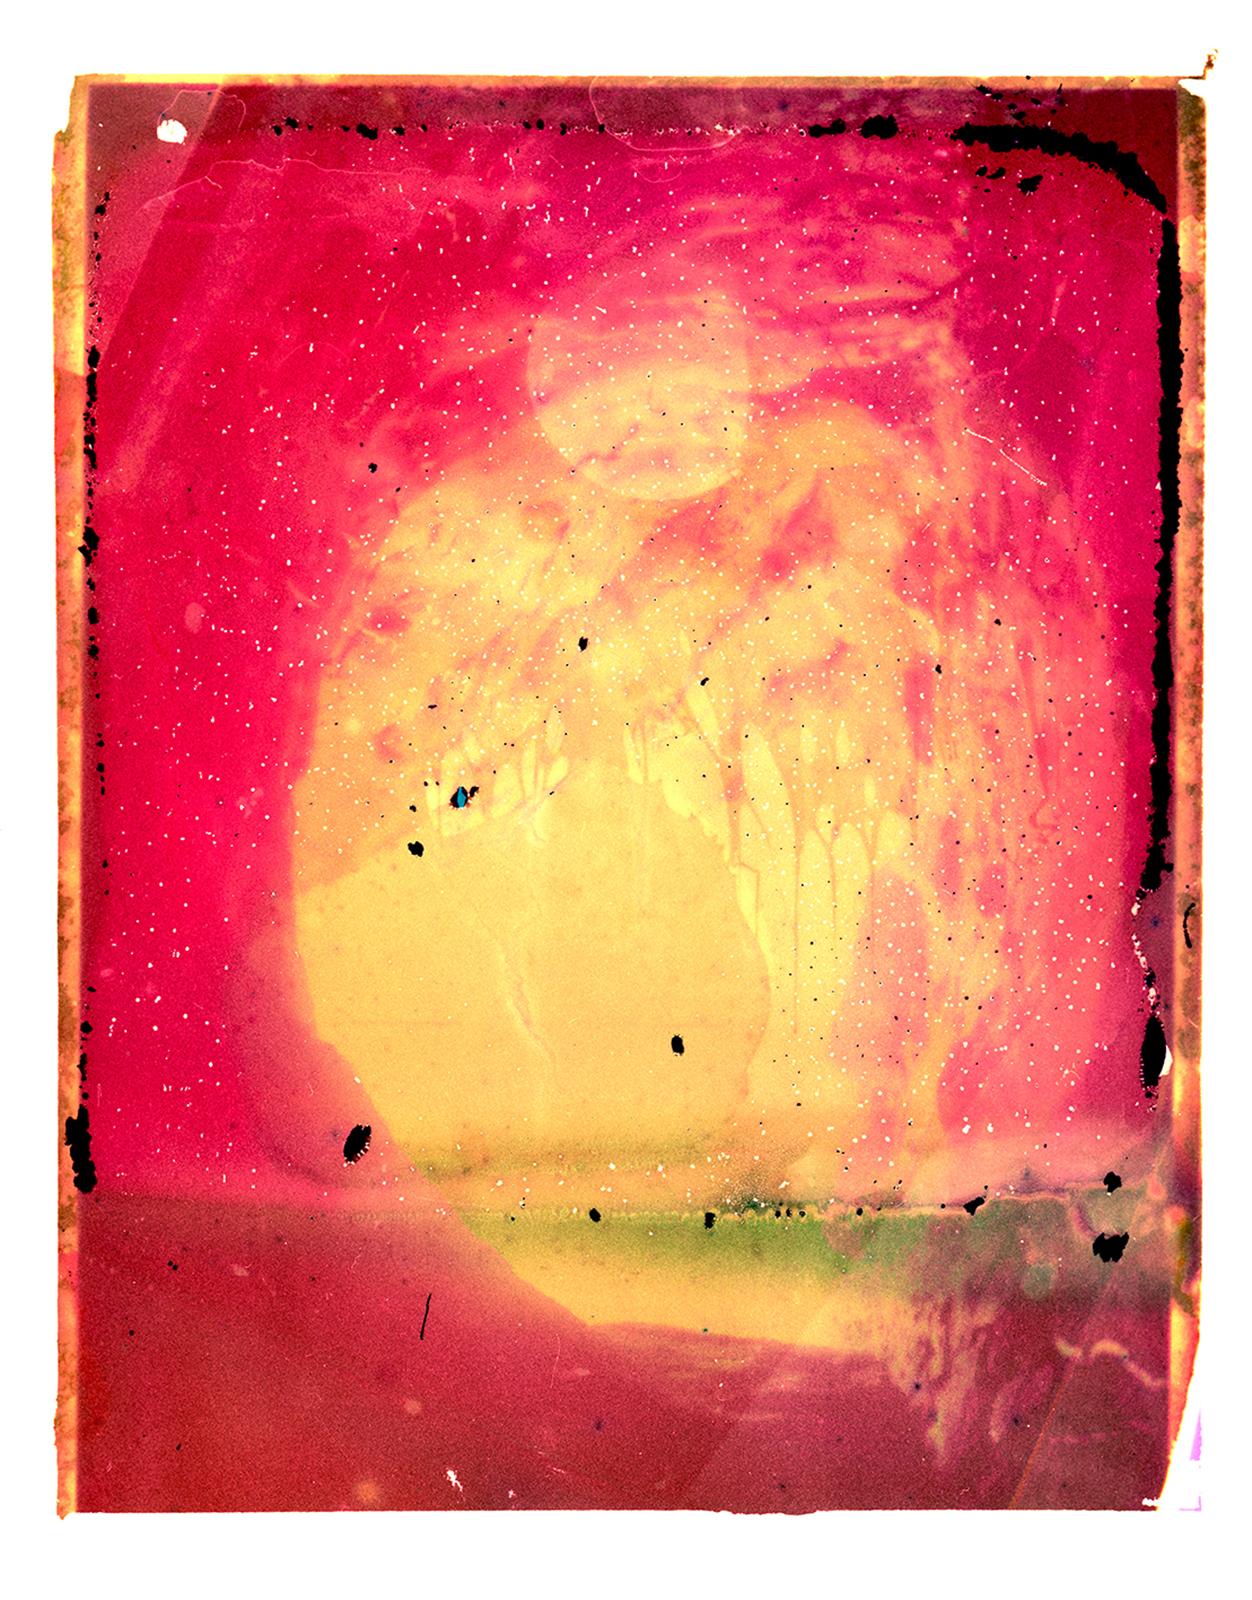 Cristina Fontsare Abstract Photograph - In the witch's cave - Contemporary, Polaroid, Photograph, Childhood, abstract